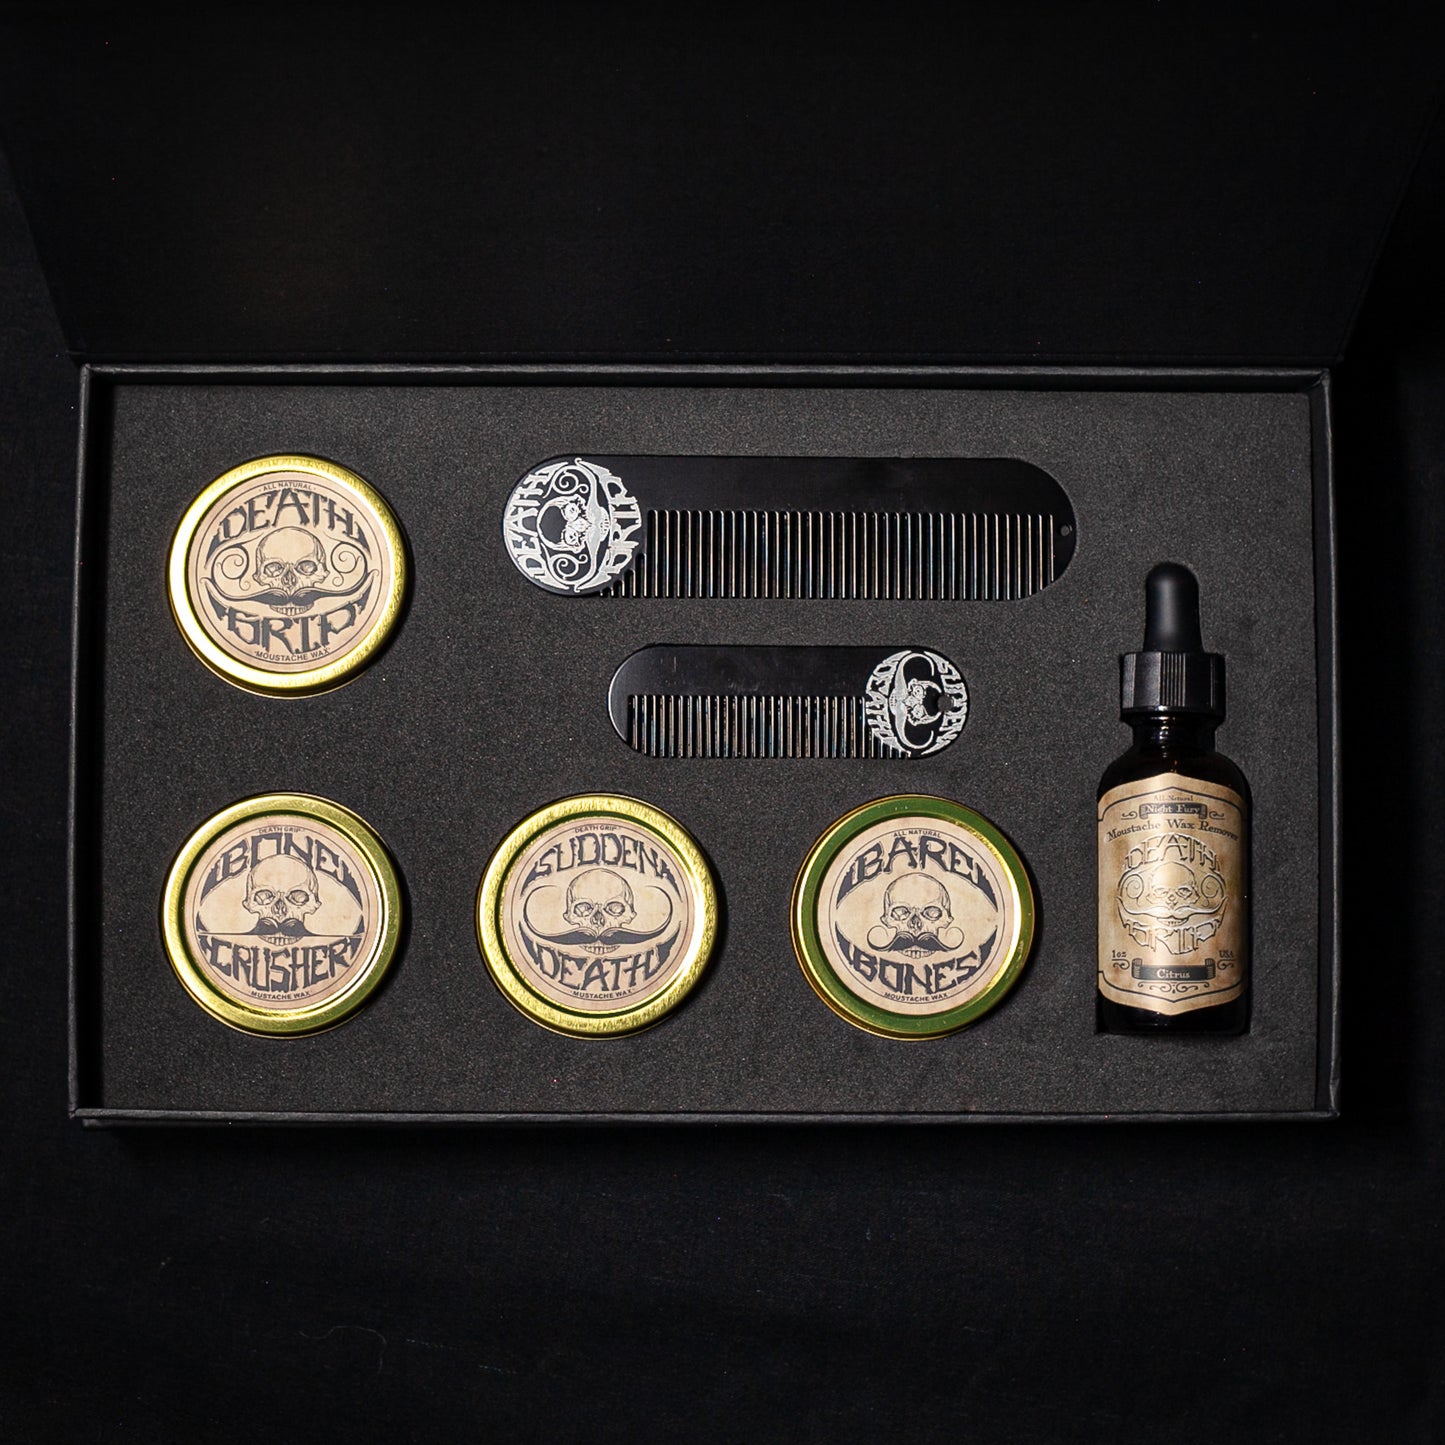 Gold Standard Mustache Kit - 4 One Ounce Mustache Wax, 2 Combs, 1 Night Fury Mustache Wax Remover Oil